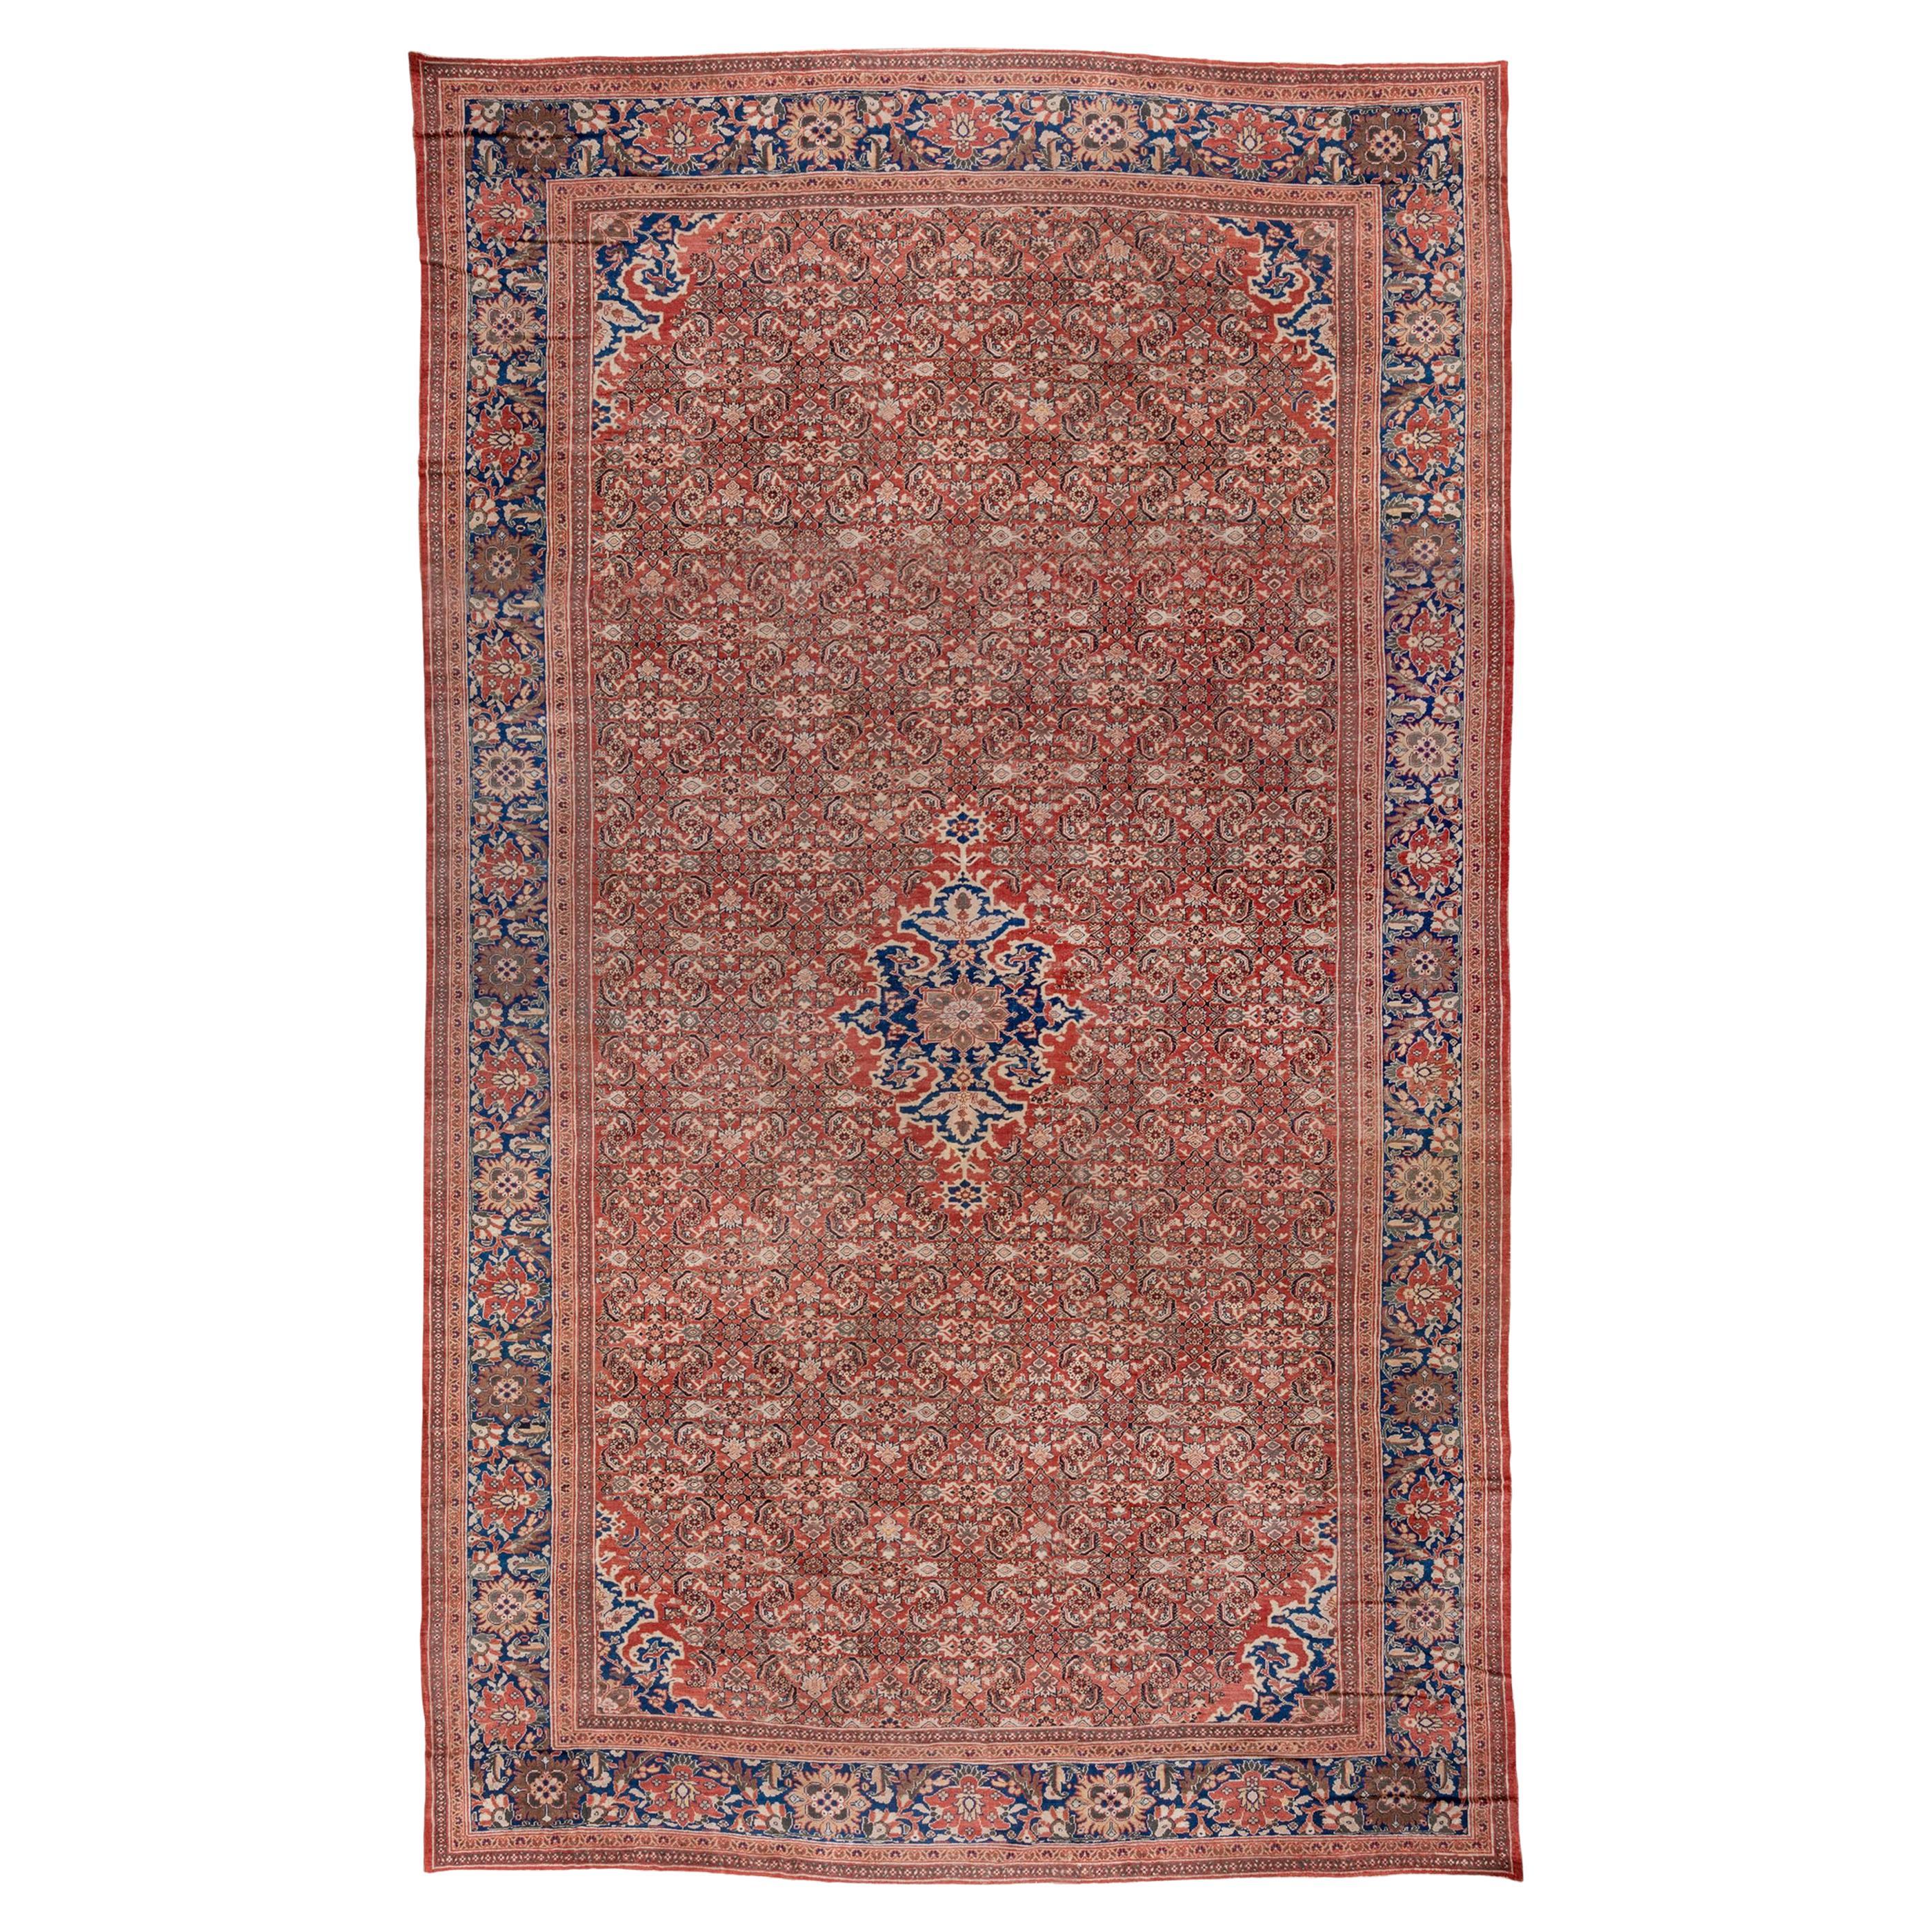 Stunning Antique Red Persian Sultanabad Mansion Carpet, Red Outer Field, 1900s For Sale